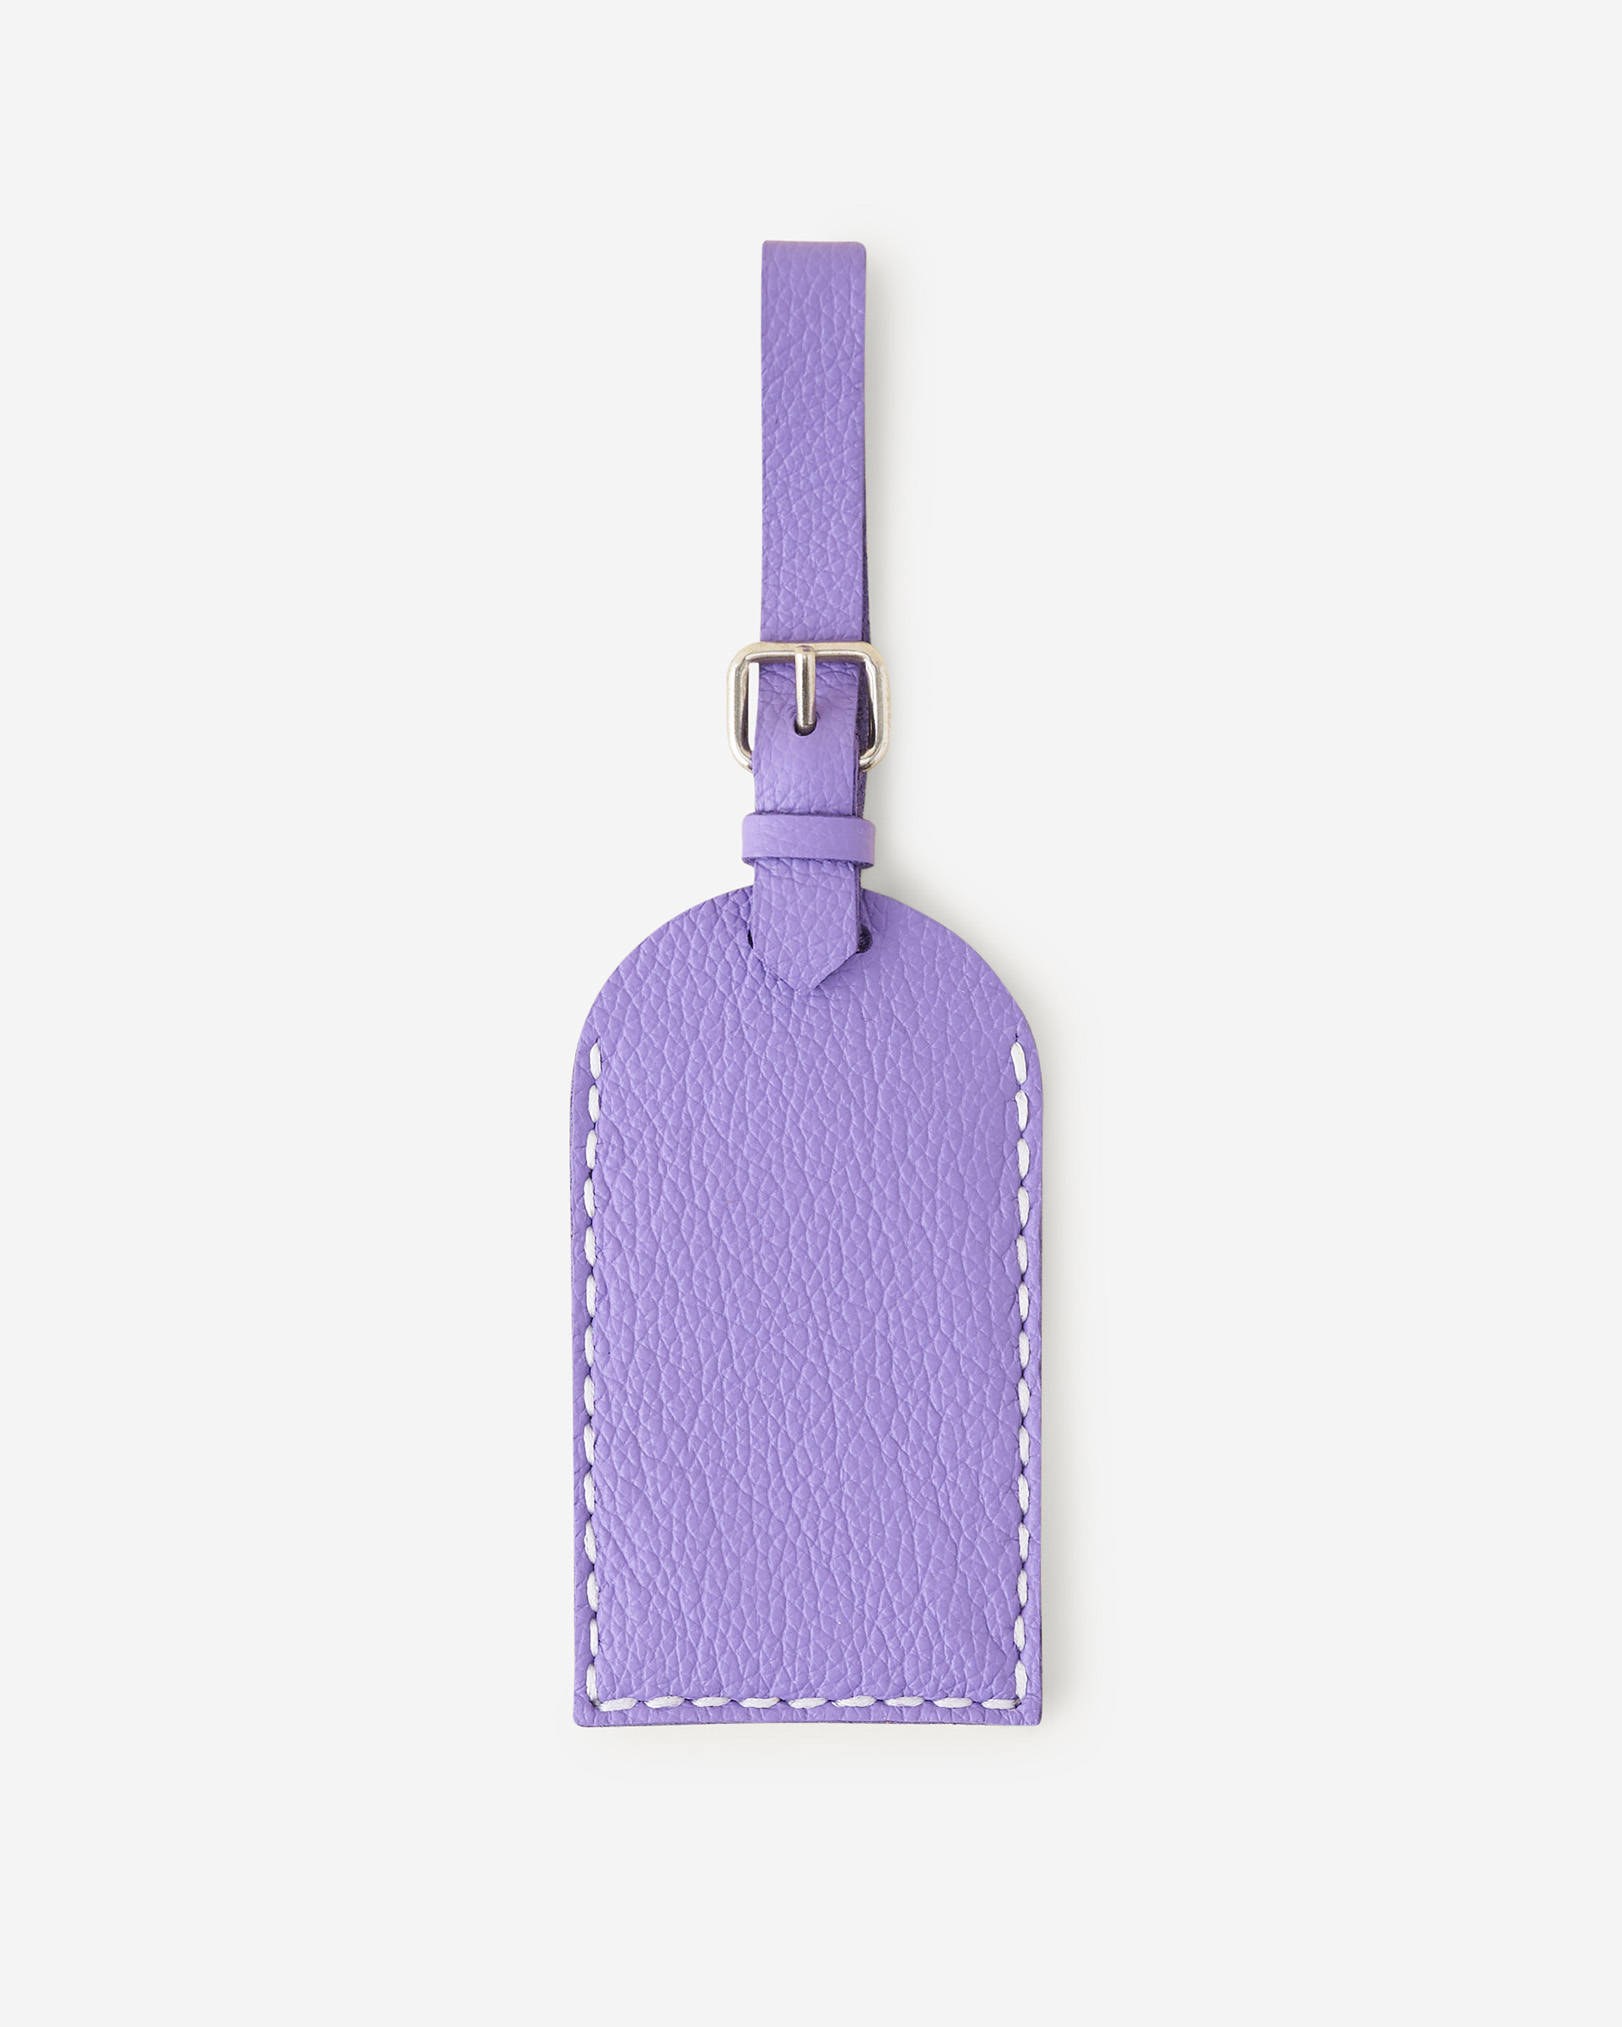 Roots Arch Luggage Tag Cervino in Dahlia Purple